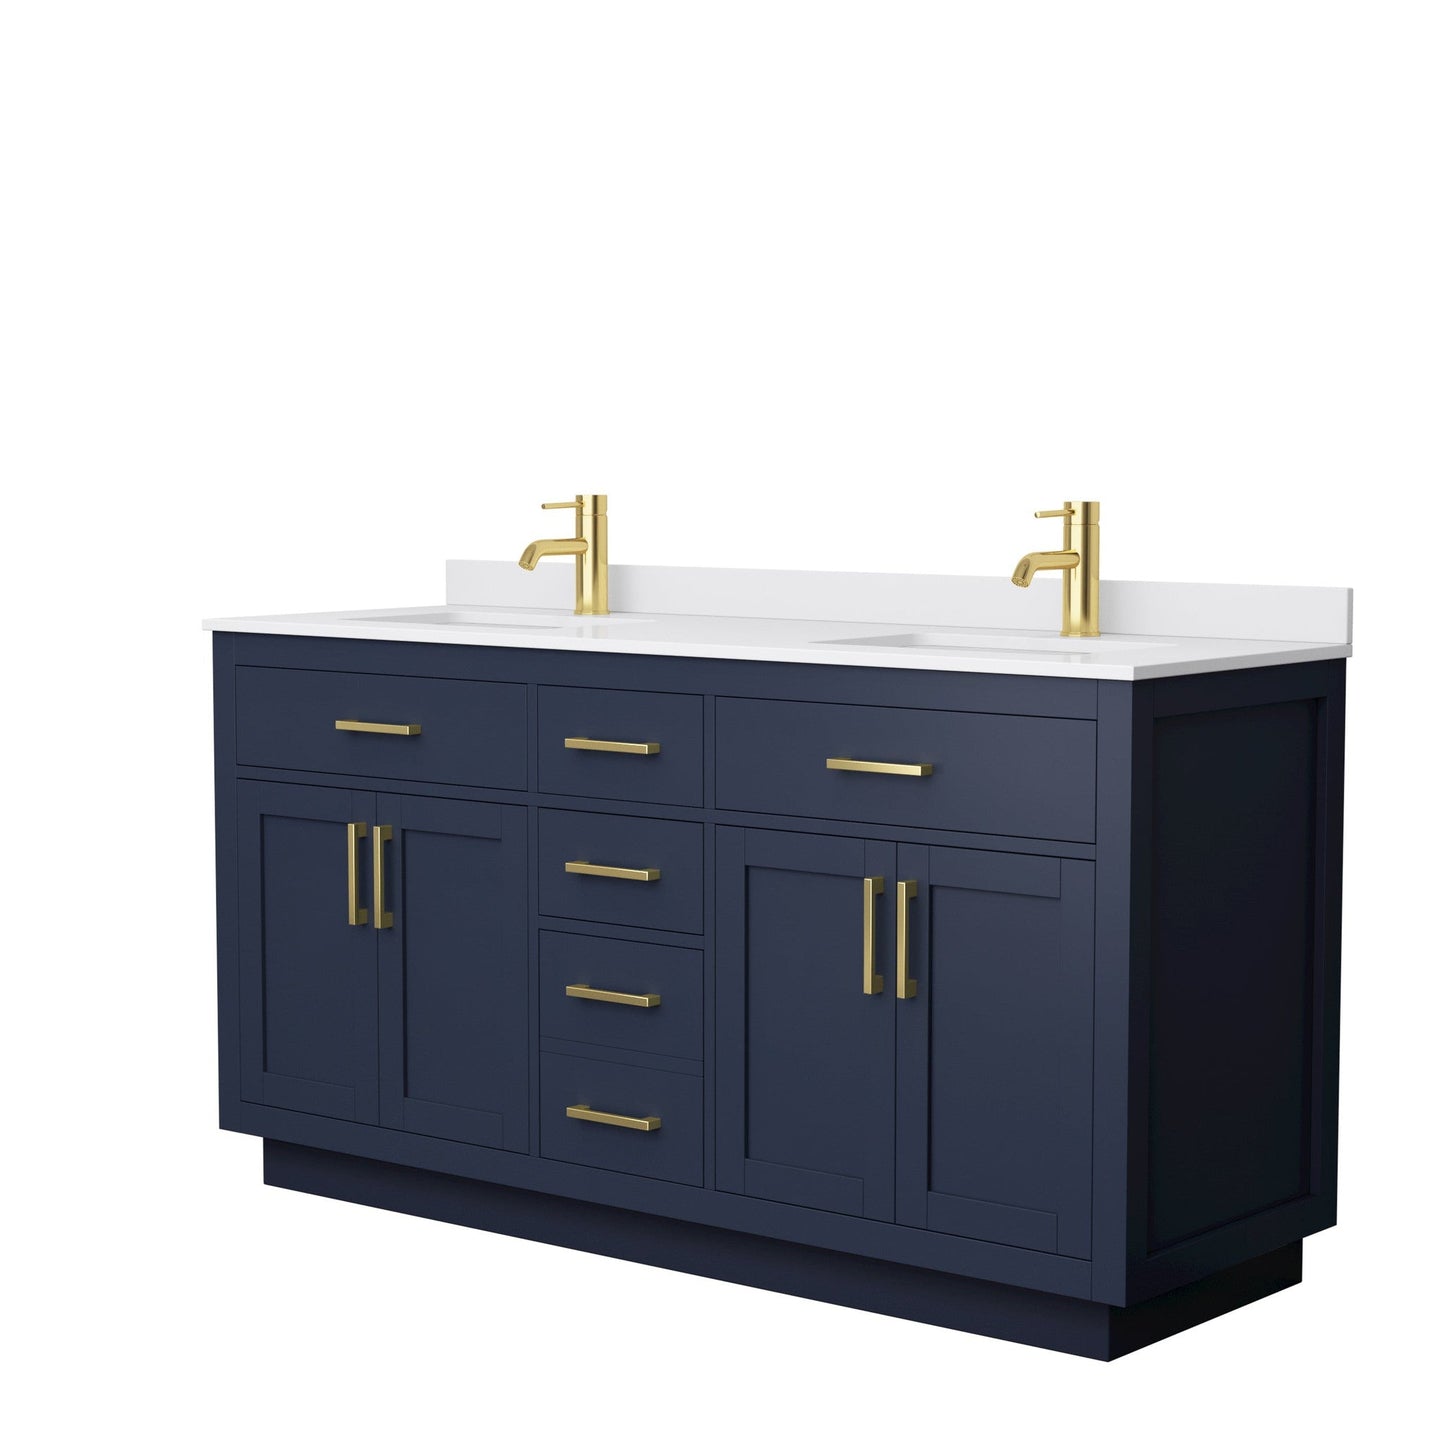 Beckett 66" Double Bathroom Vanity With Toe Kick in Dark Blue, White Cultured Marble Countertop, Undermount Square Sinks, Brushed Gold Trim